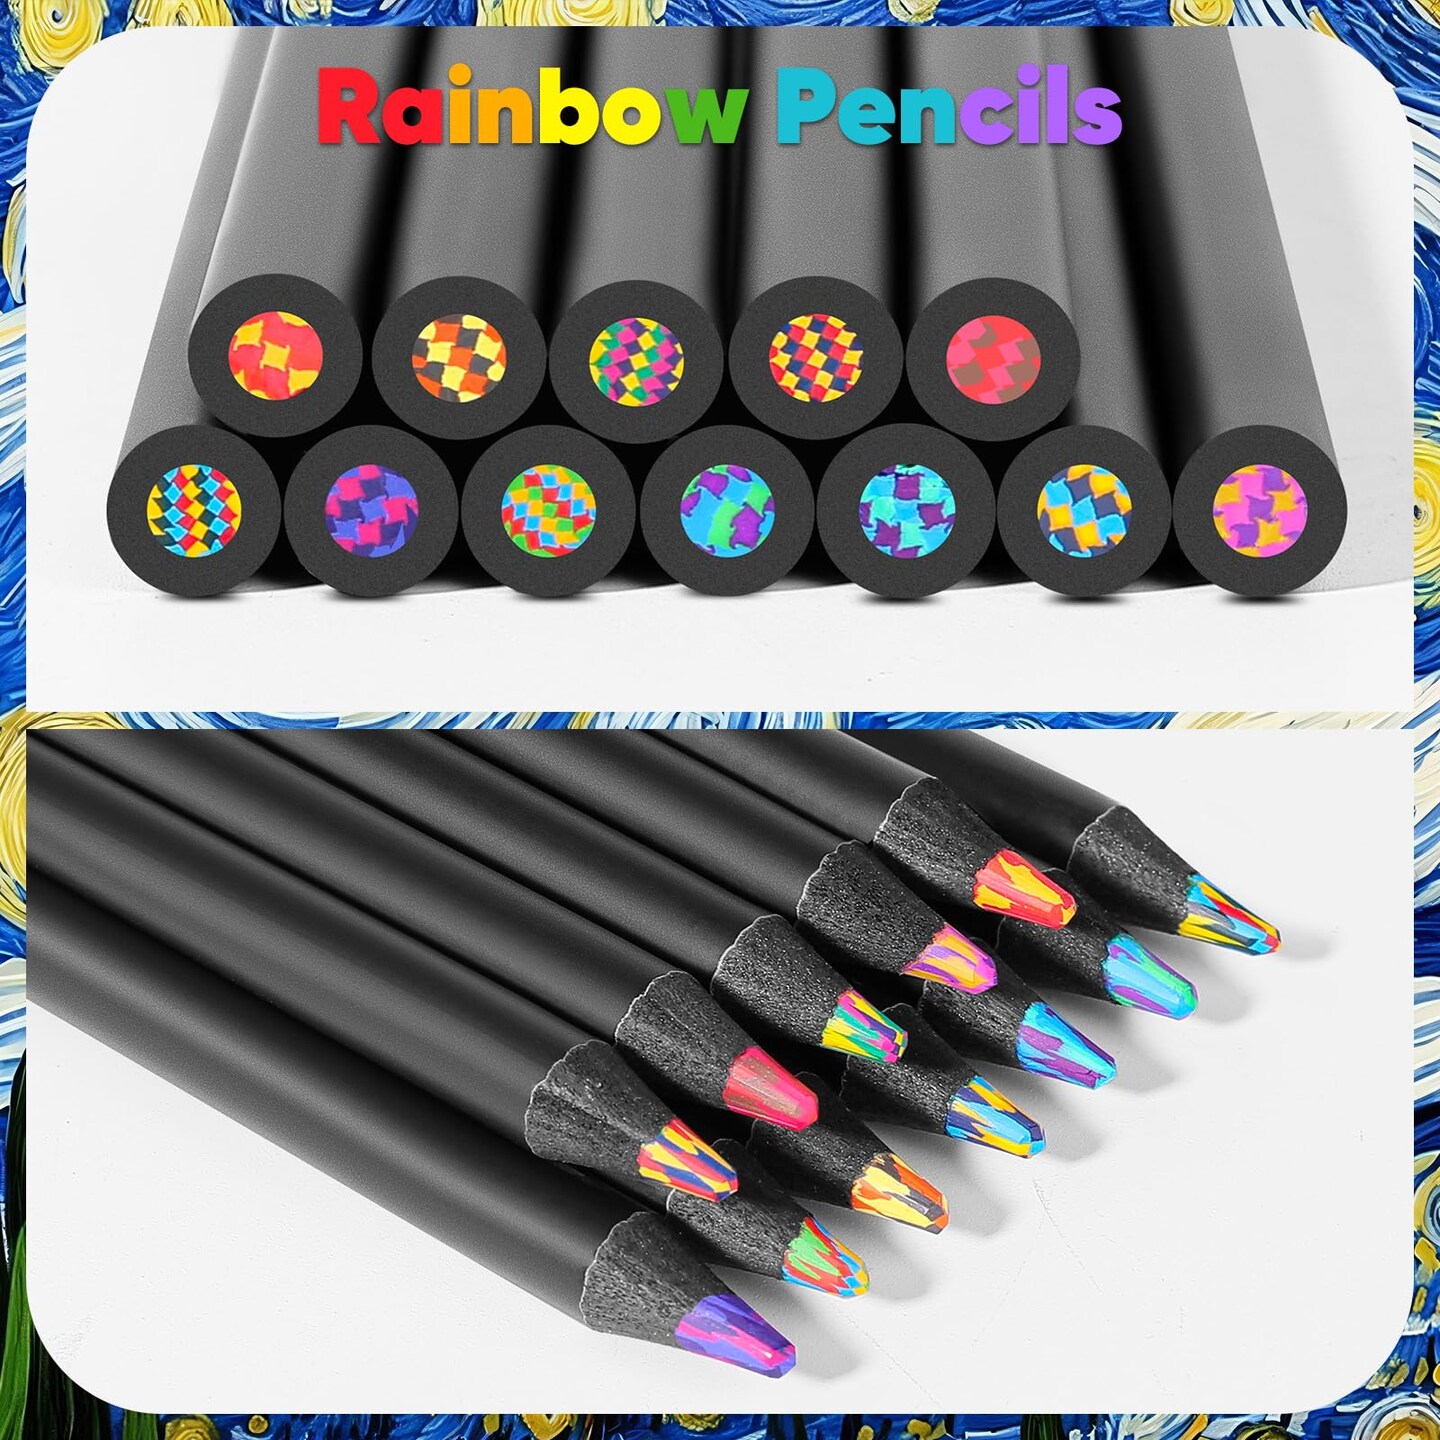 Hapikalor 12-Color Rainbow Pencils Aesthetic Jumbo Colored Pencils for Adult Coloring Sketching Drawing, Cute Drawing Kit Fun Pencils Cool Gifts Stuff Art Supplies for Adults Kids, School Supplies